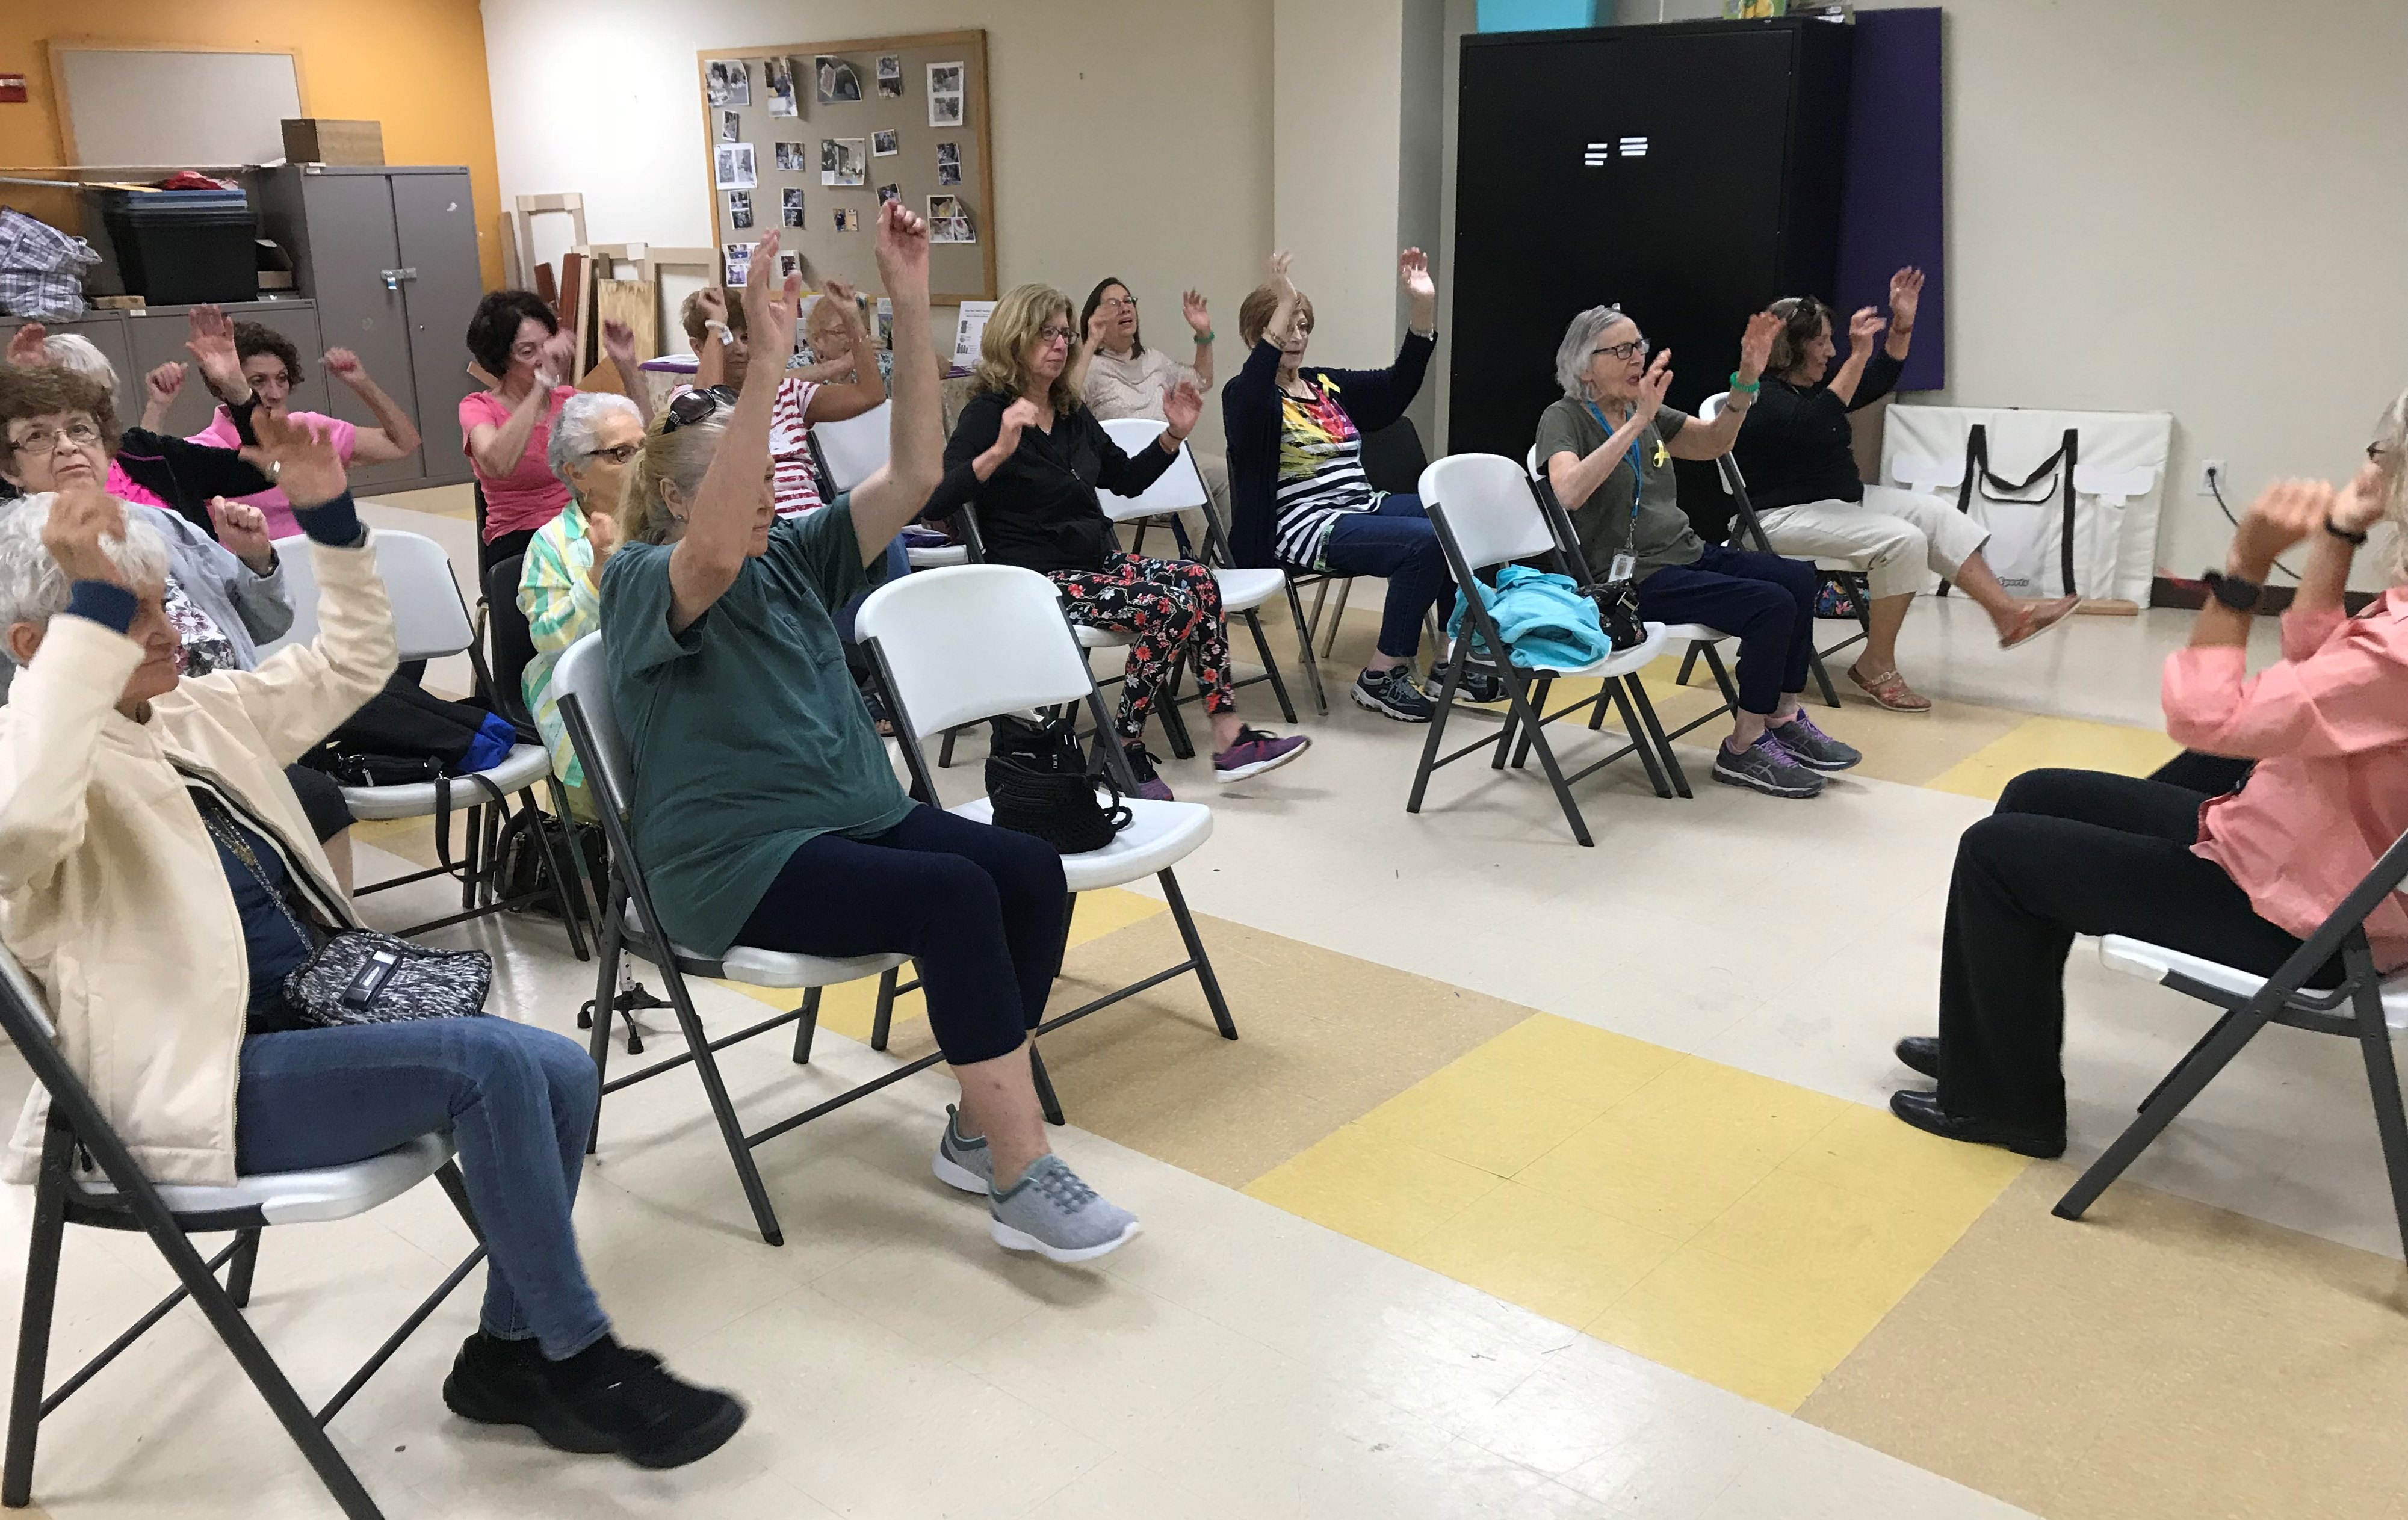 Older adults participated in the evidence-based falls prevention class